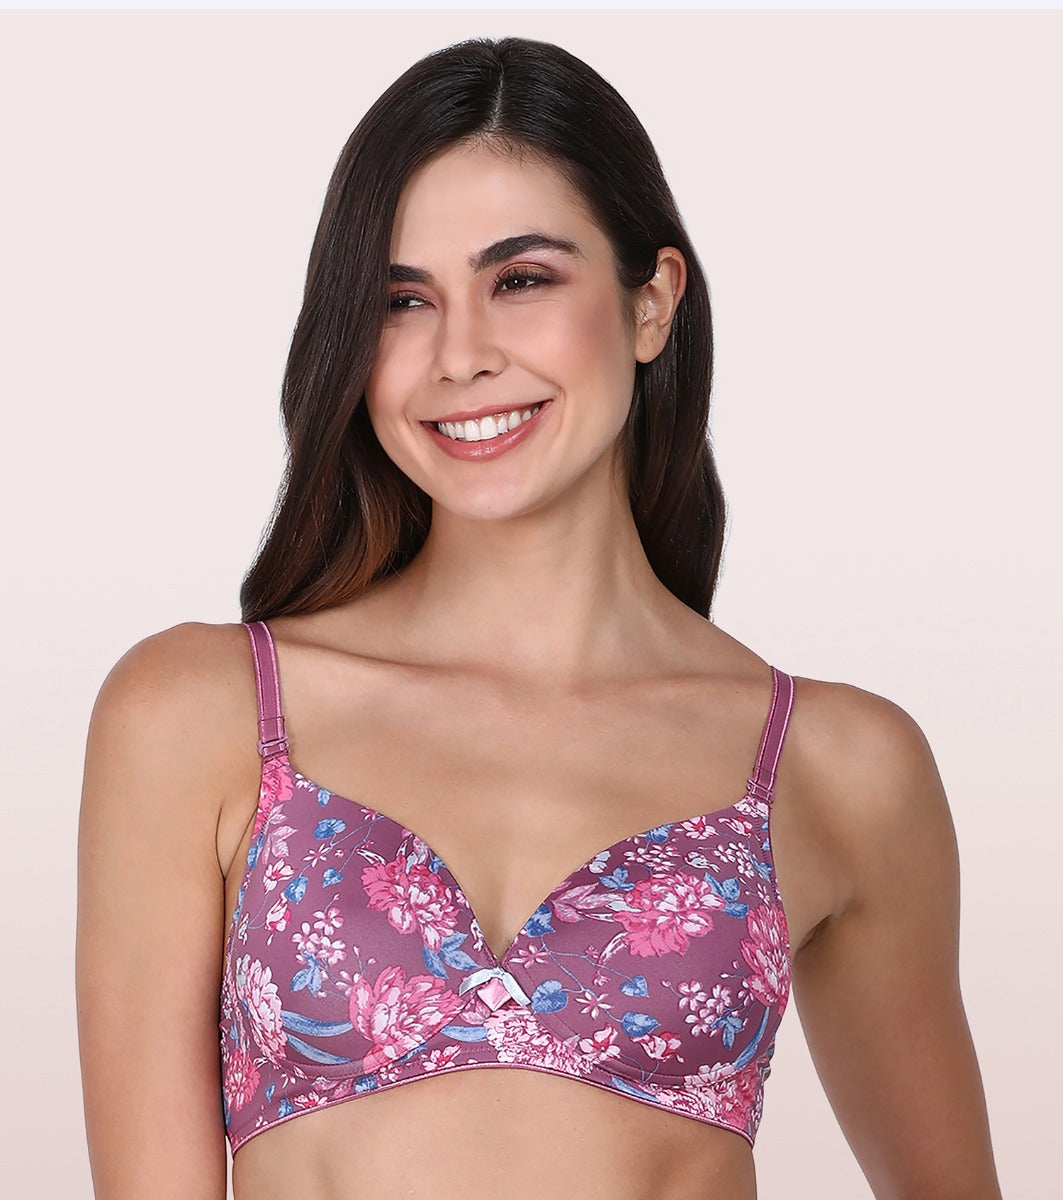 Enamor AB75 Cotton, Spandex Full Coverage Seamless T-Shirt Bra (38B,  Purple) in Delhi at best price by London Beauty - Justdial